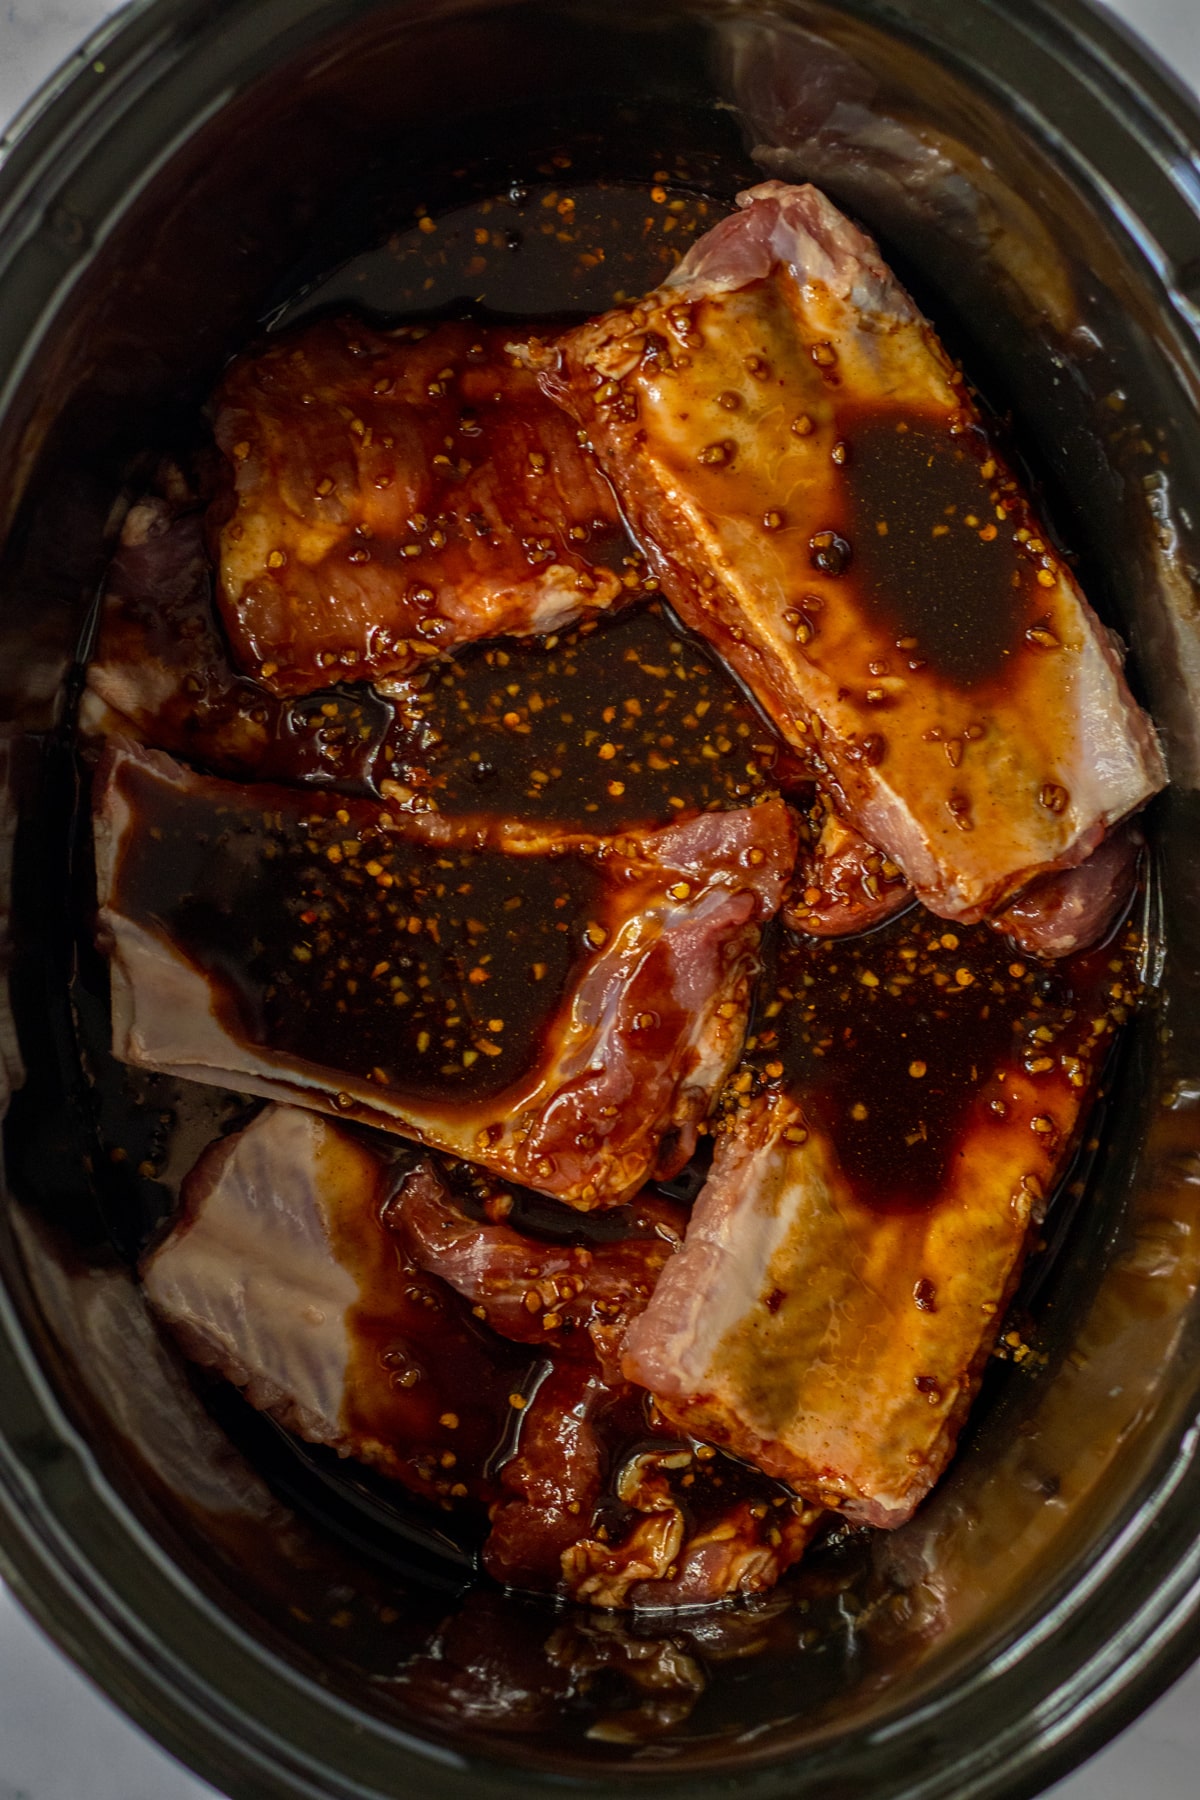 Next process in preparing Slow Cooker Spare Ribs is to add the mixture to the ribs.